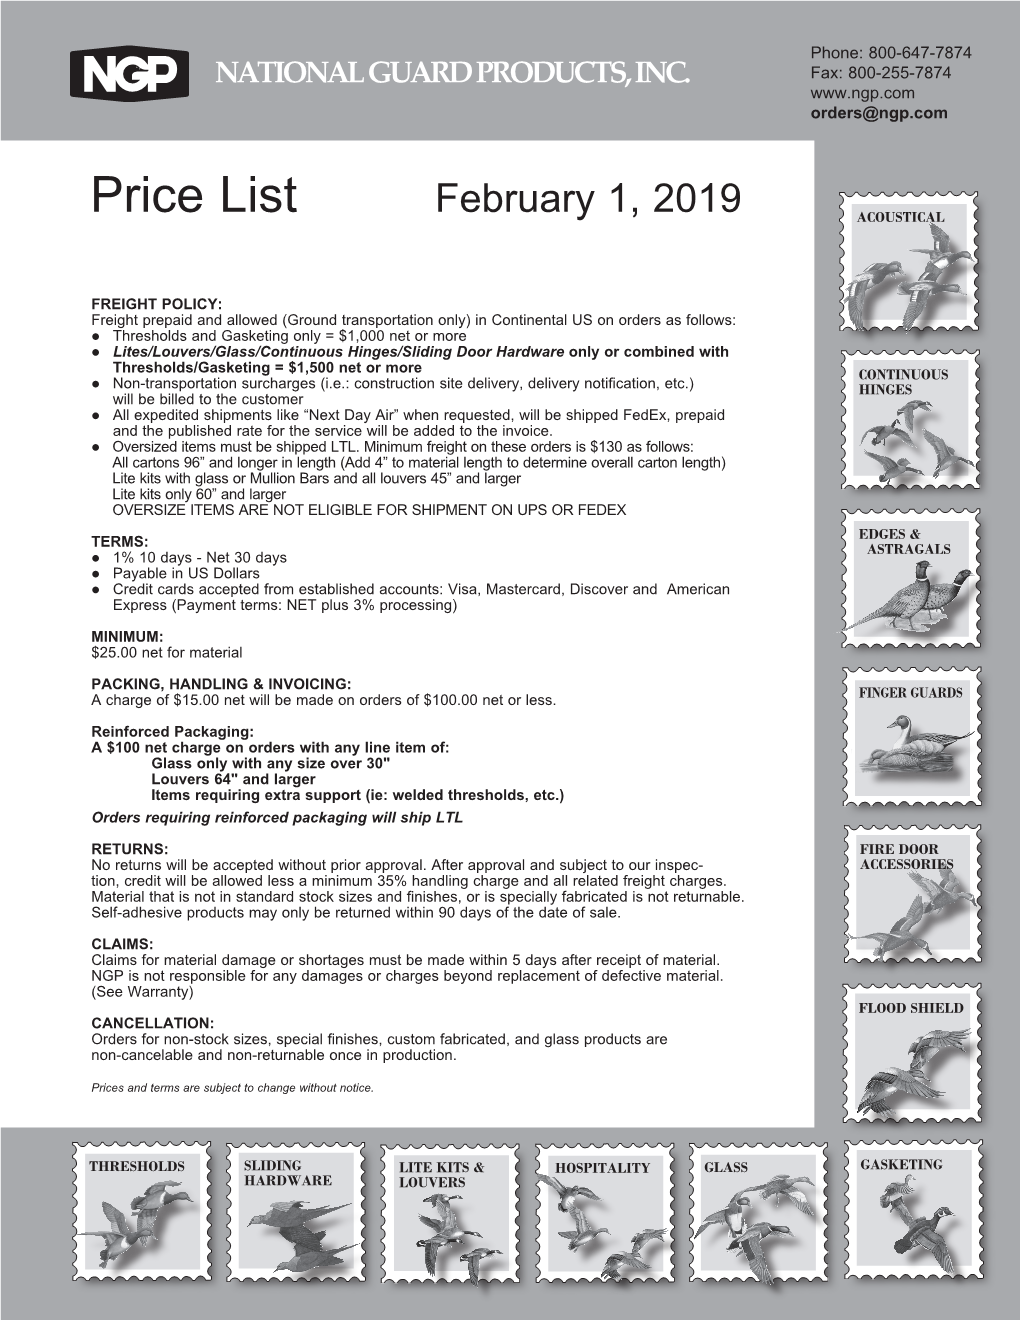 Price List February 1, 2019 ACOUSTICAL